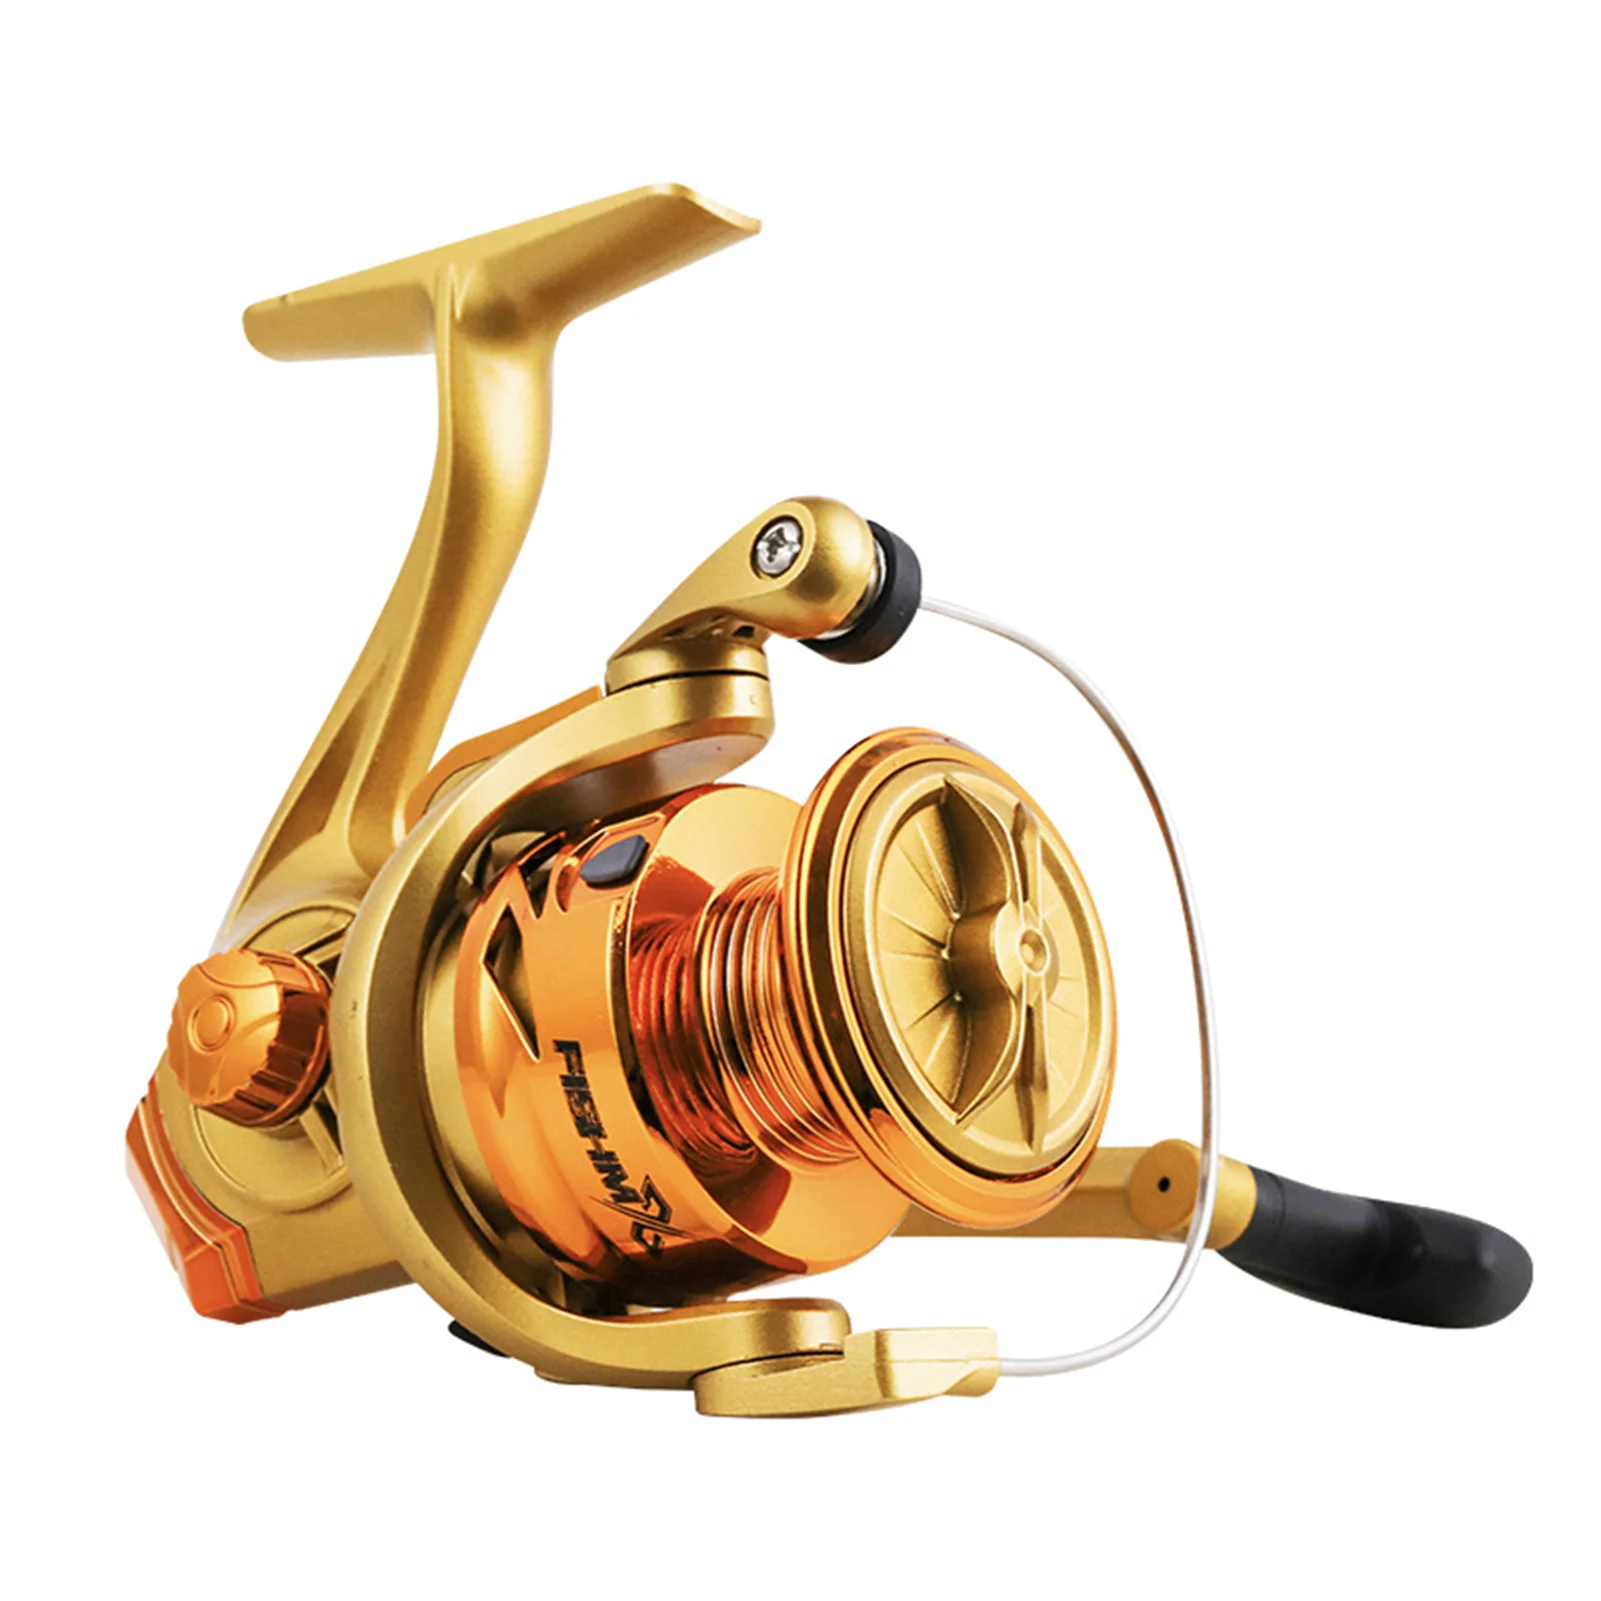 https://ae01.alicdn.com/kf/Sd1f7d02f390b4005a4fcd64664c2aea06/Fresh-Water-Spinning-Reel-14-BB-CNC-Spinning-Reel-for-Reservior-Fishing-Use-XR-Hot.jpg